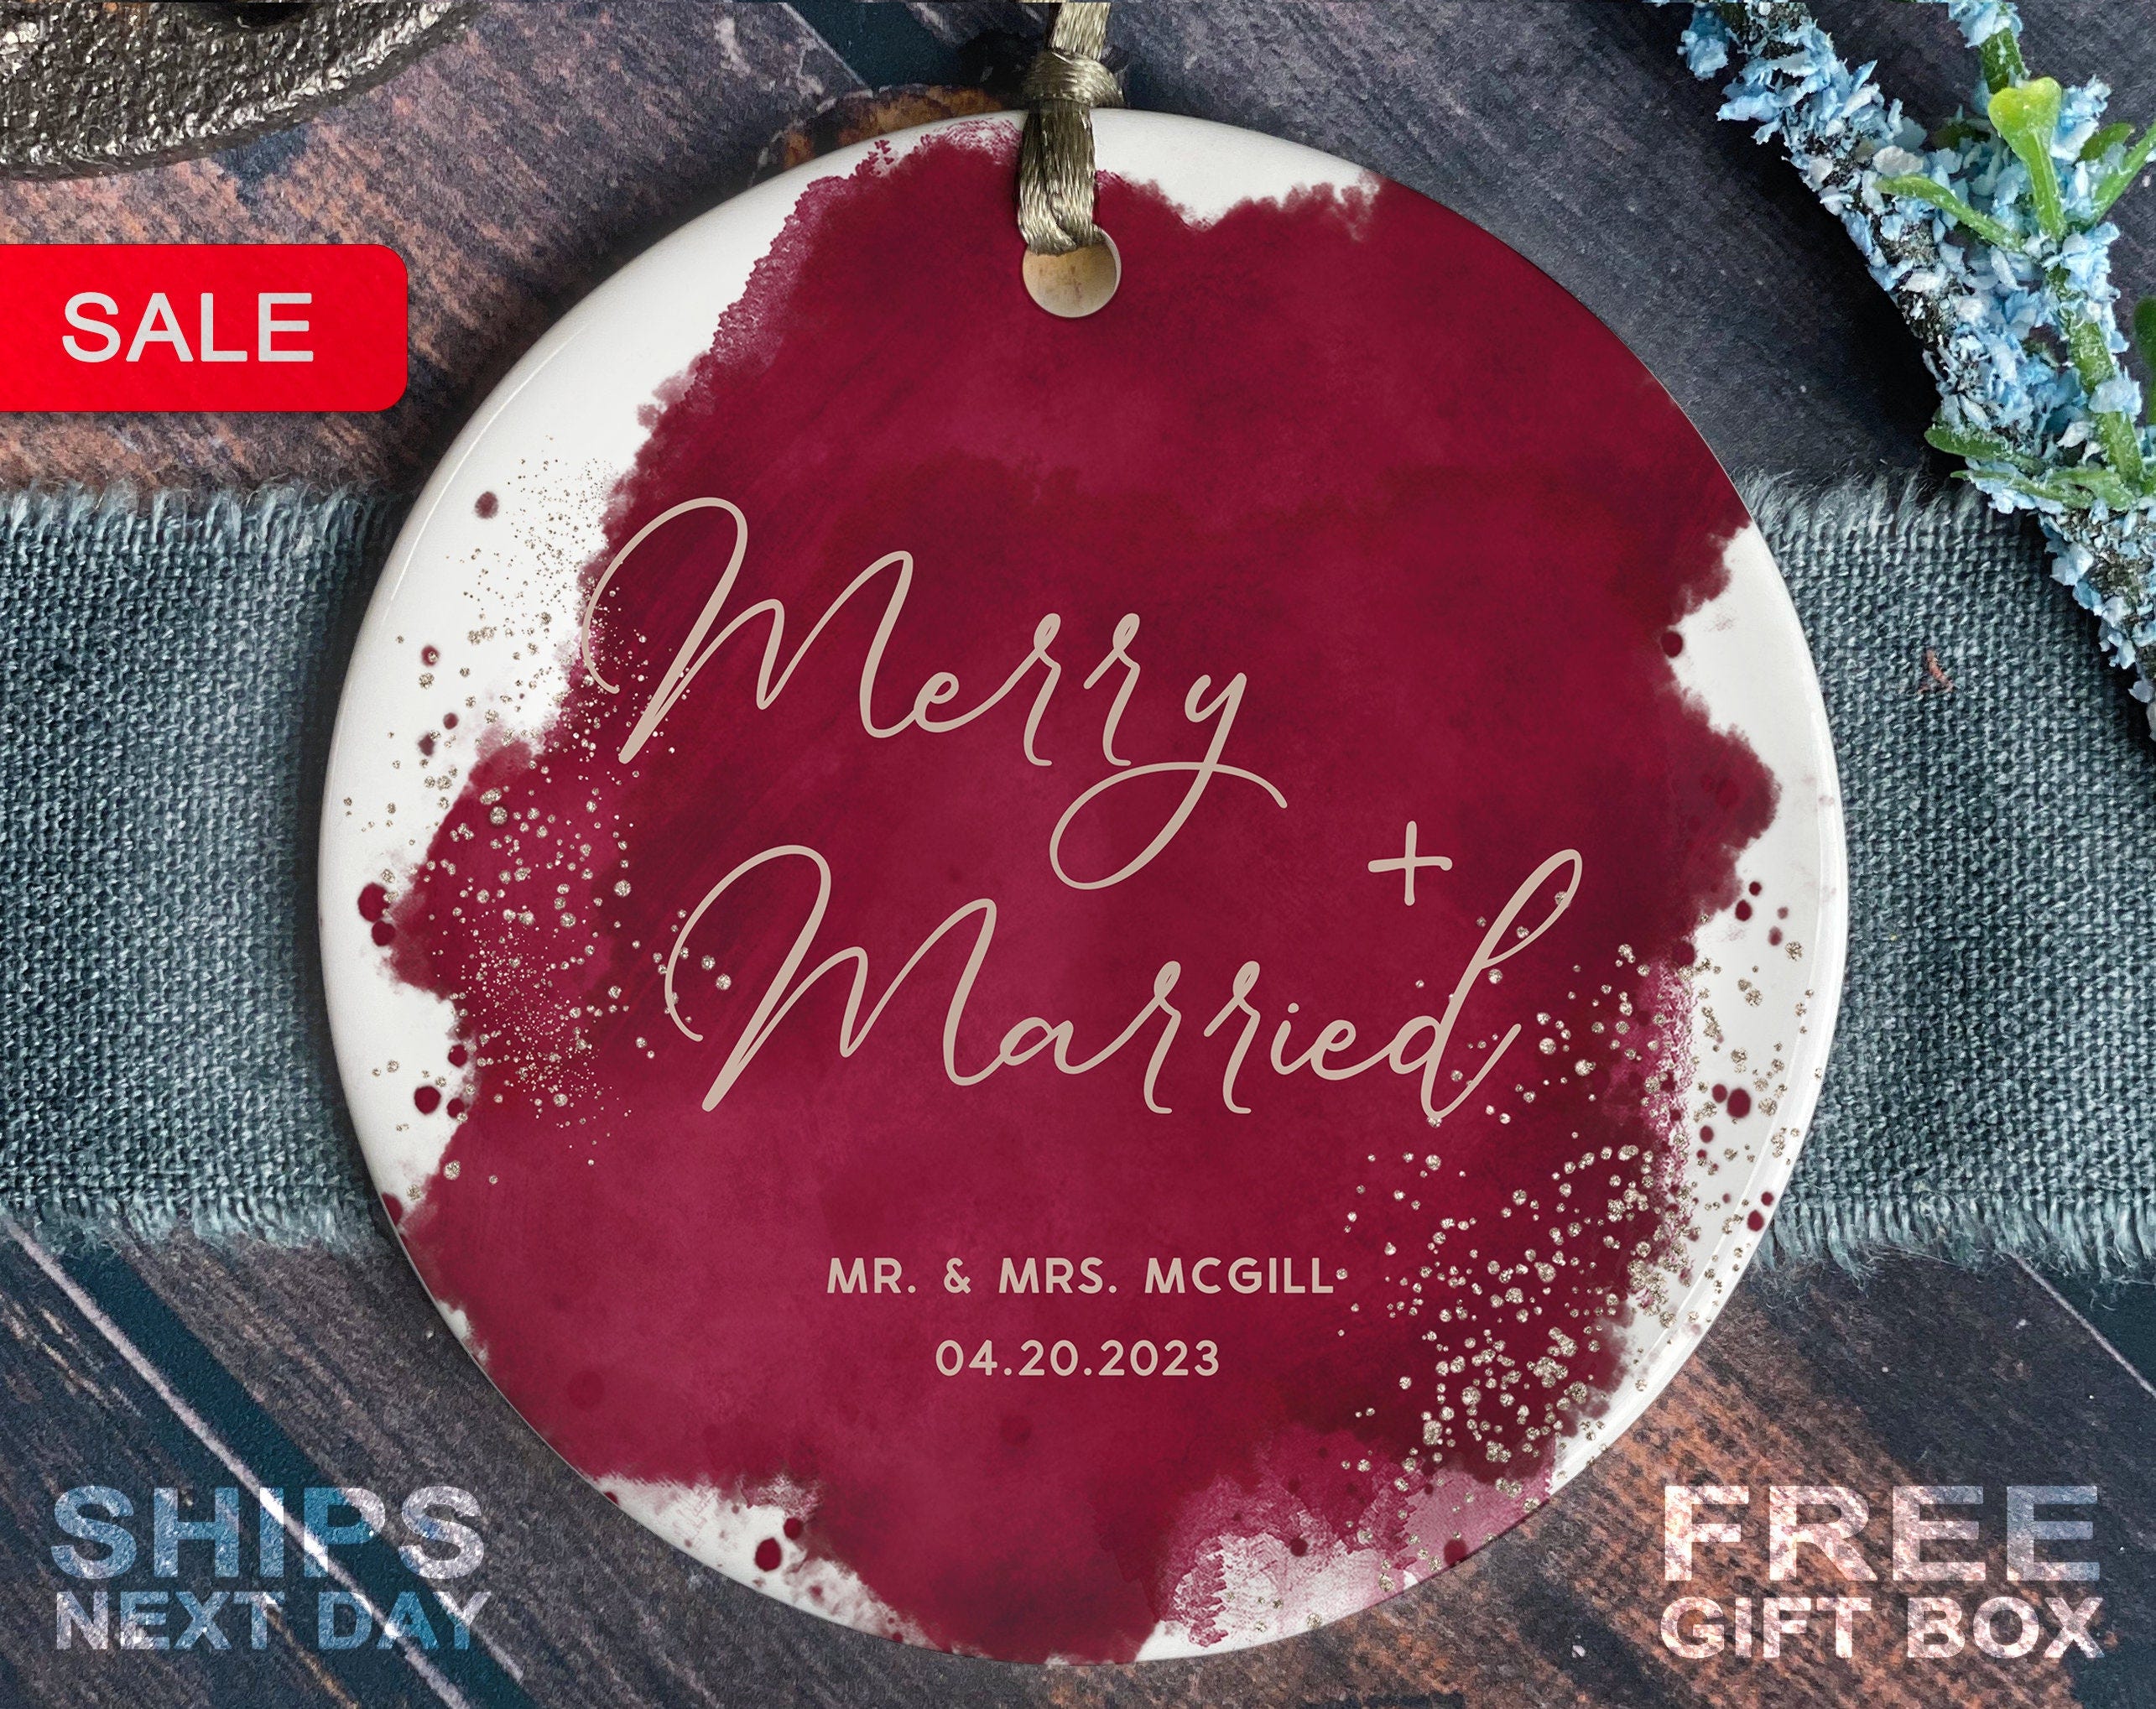 Personalized Married Ornament - Mr and Mrs Christmas Ornament - Our First Christmas Married as Mr and Mrs Keepsake - Wedding gift